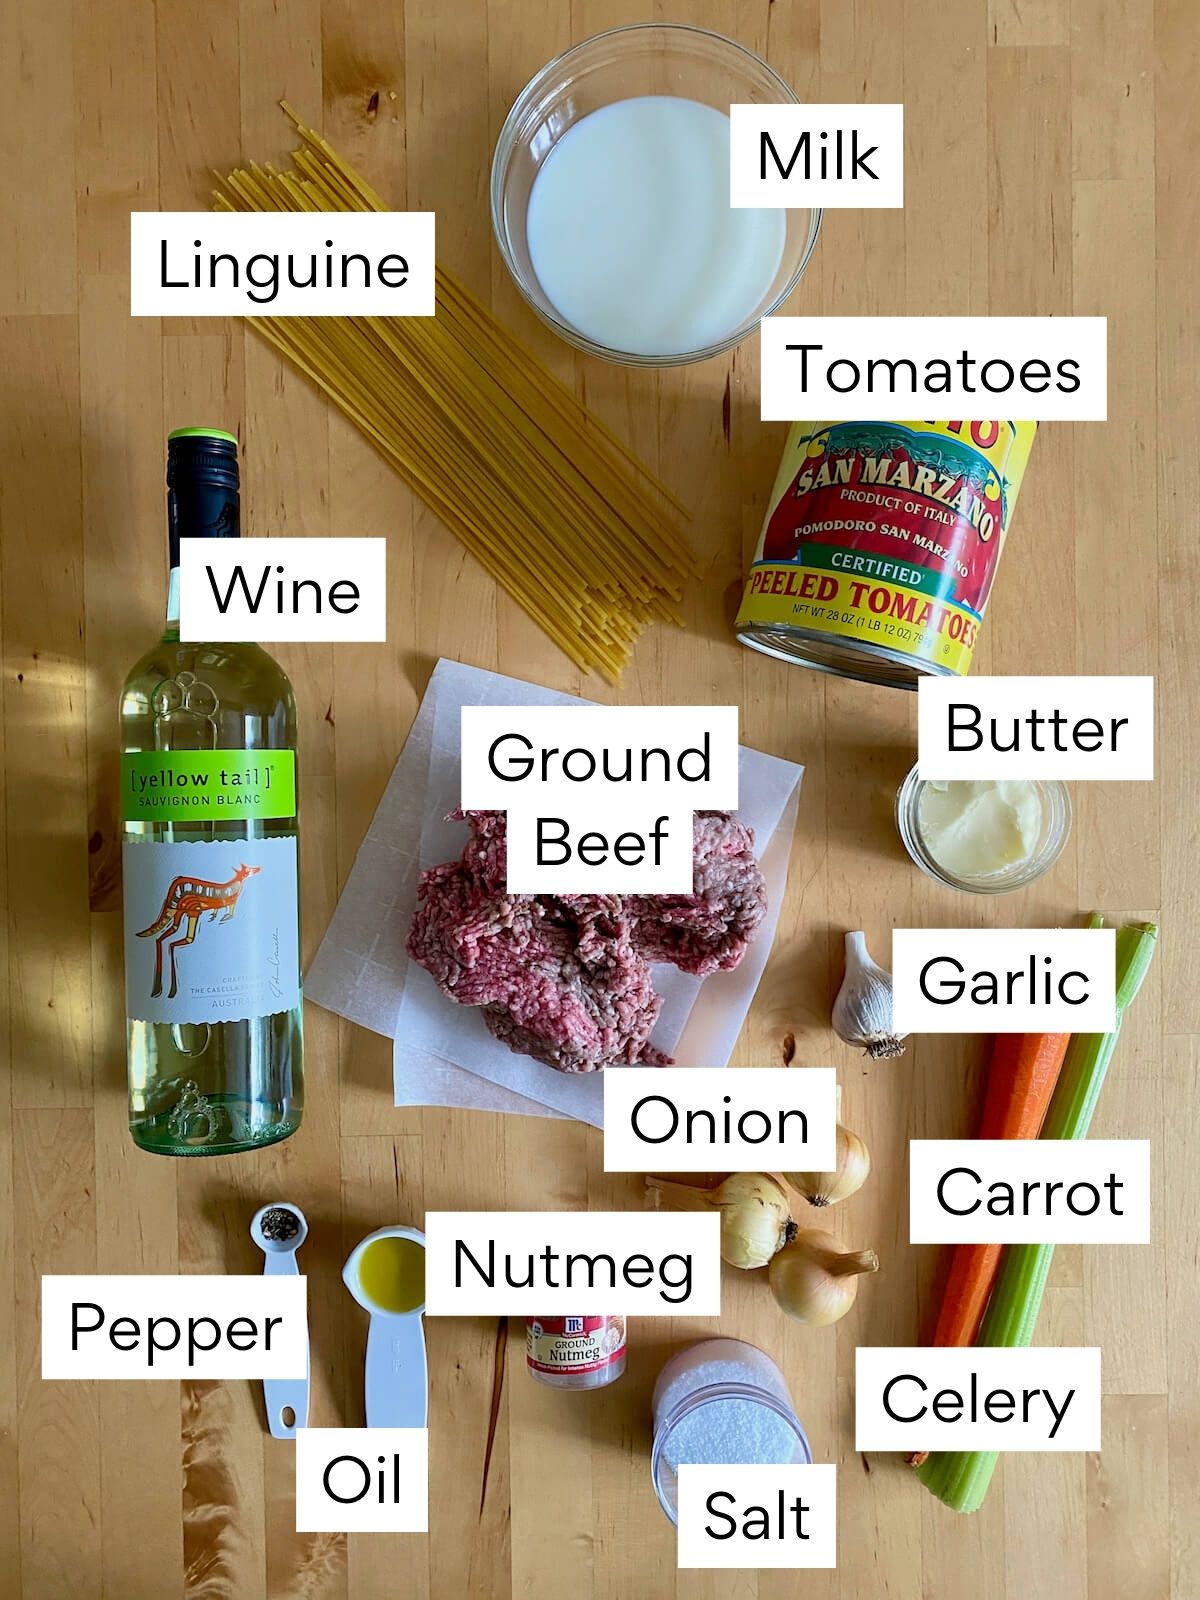 The ingredients to make linguine bolognese on a butcher block countertop. Each ingredient is labeled with text. They include linguine, milk, tomatoes, wine, ground beef, butter, garlic, onion, carrot, celery, nutmeg, pepper, oil, and salt.